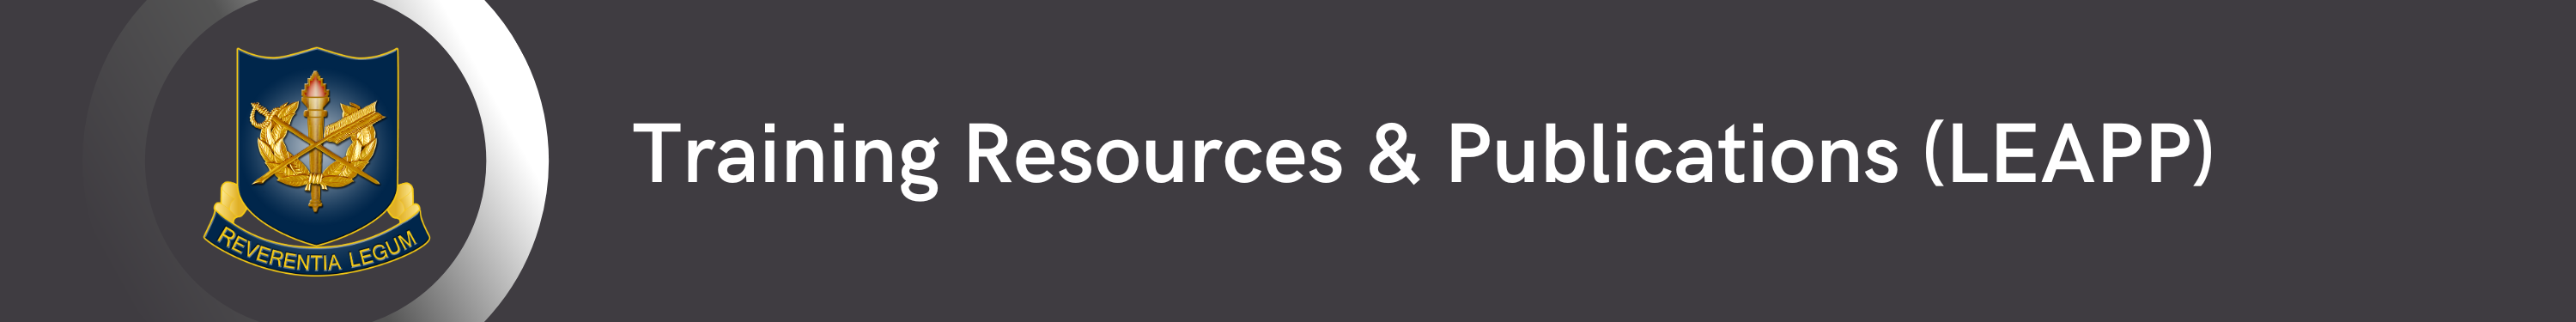 Training Resources & Publications (LEAPP) Banner